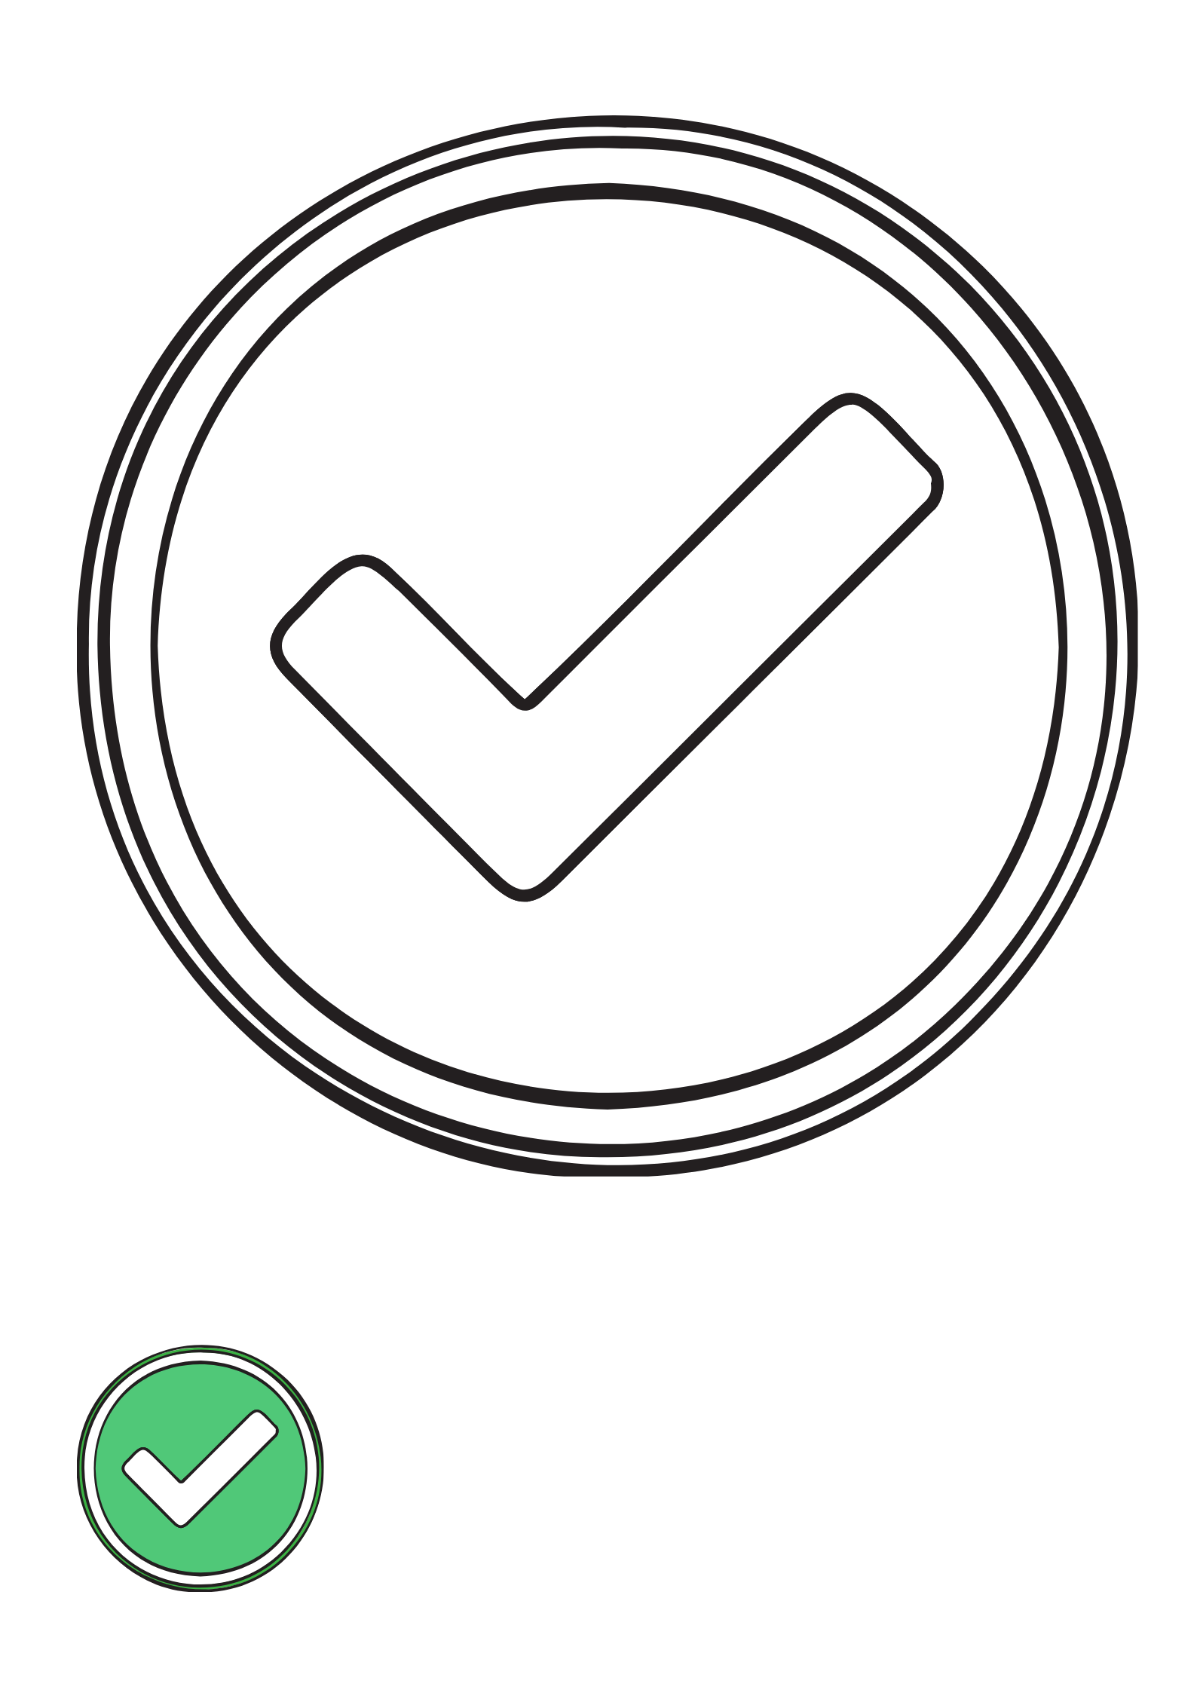 Green Tick Mark Coloring Page Template